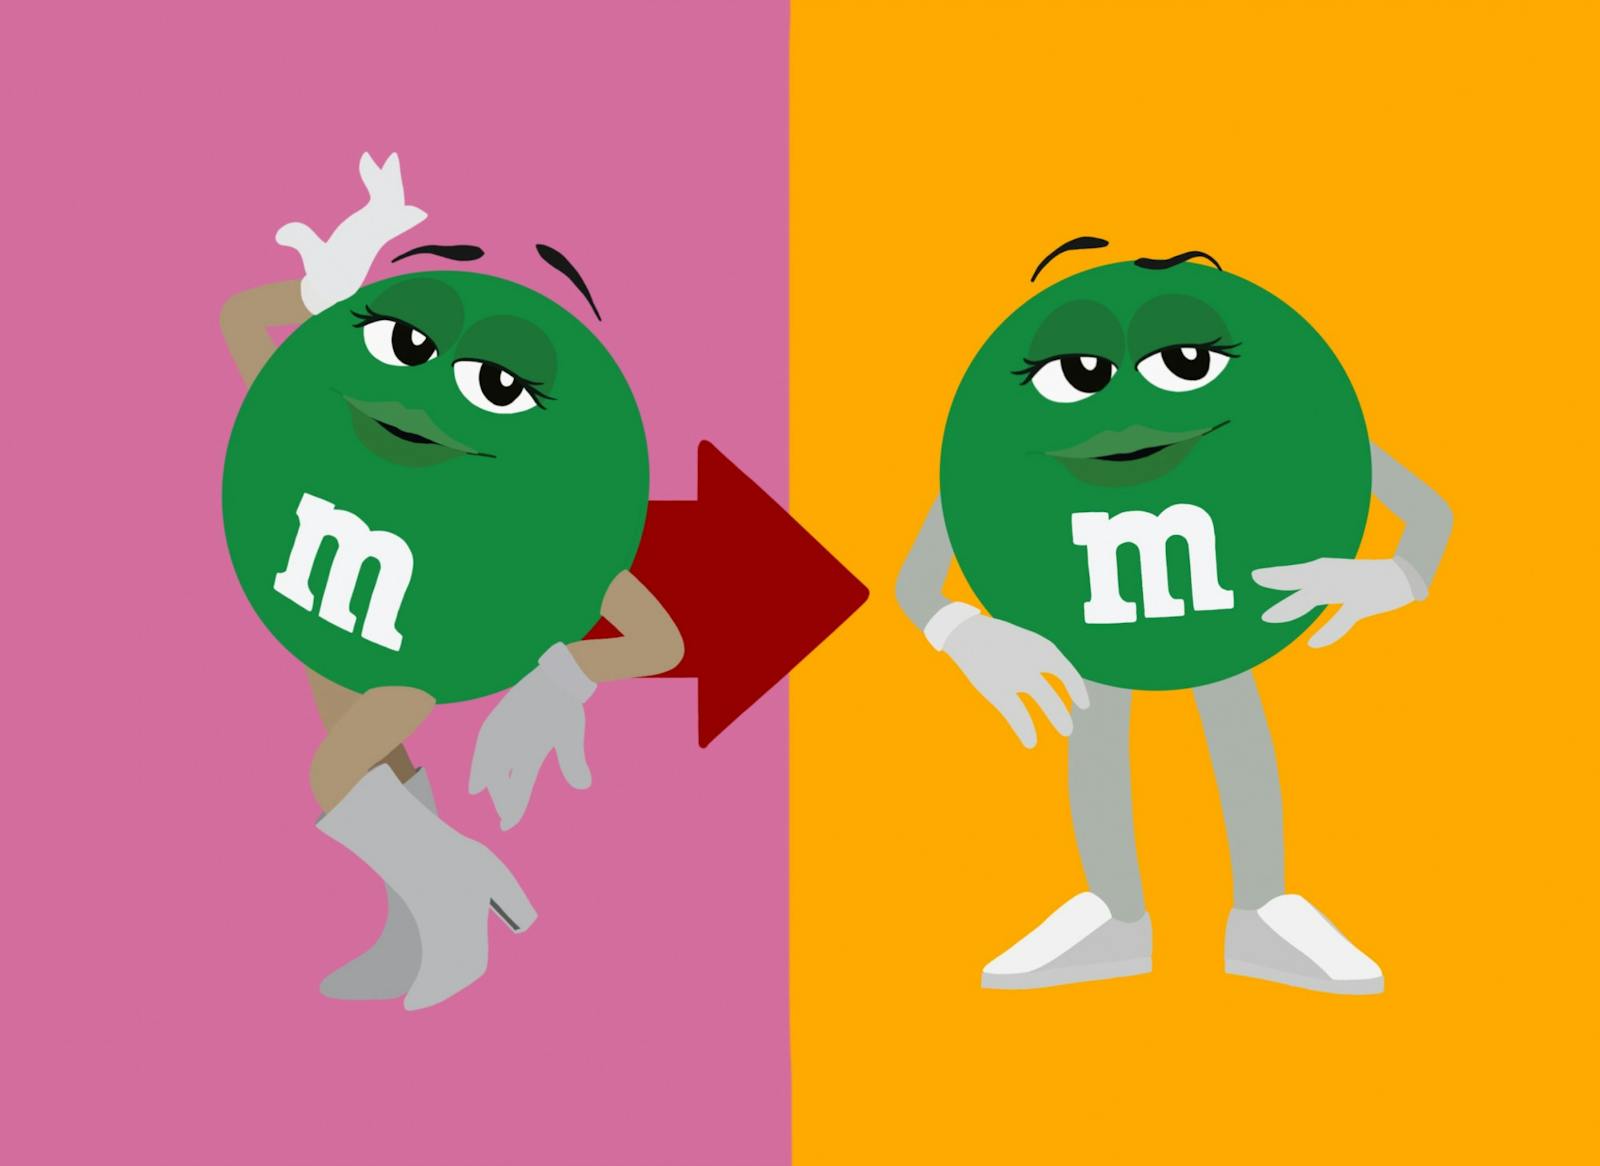 The strange agenda for the green M&M and her heels - The State News